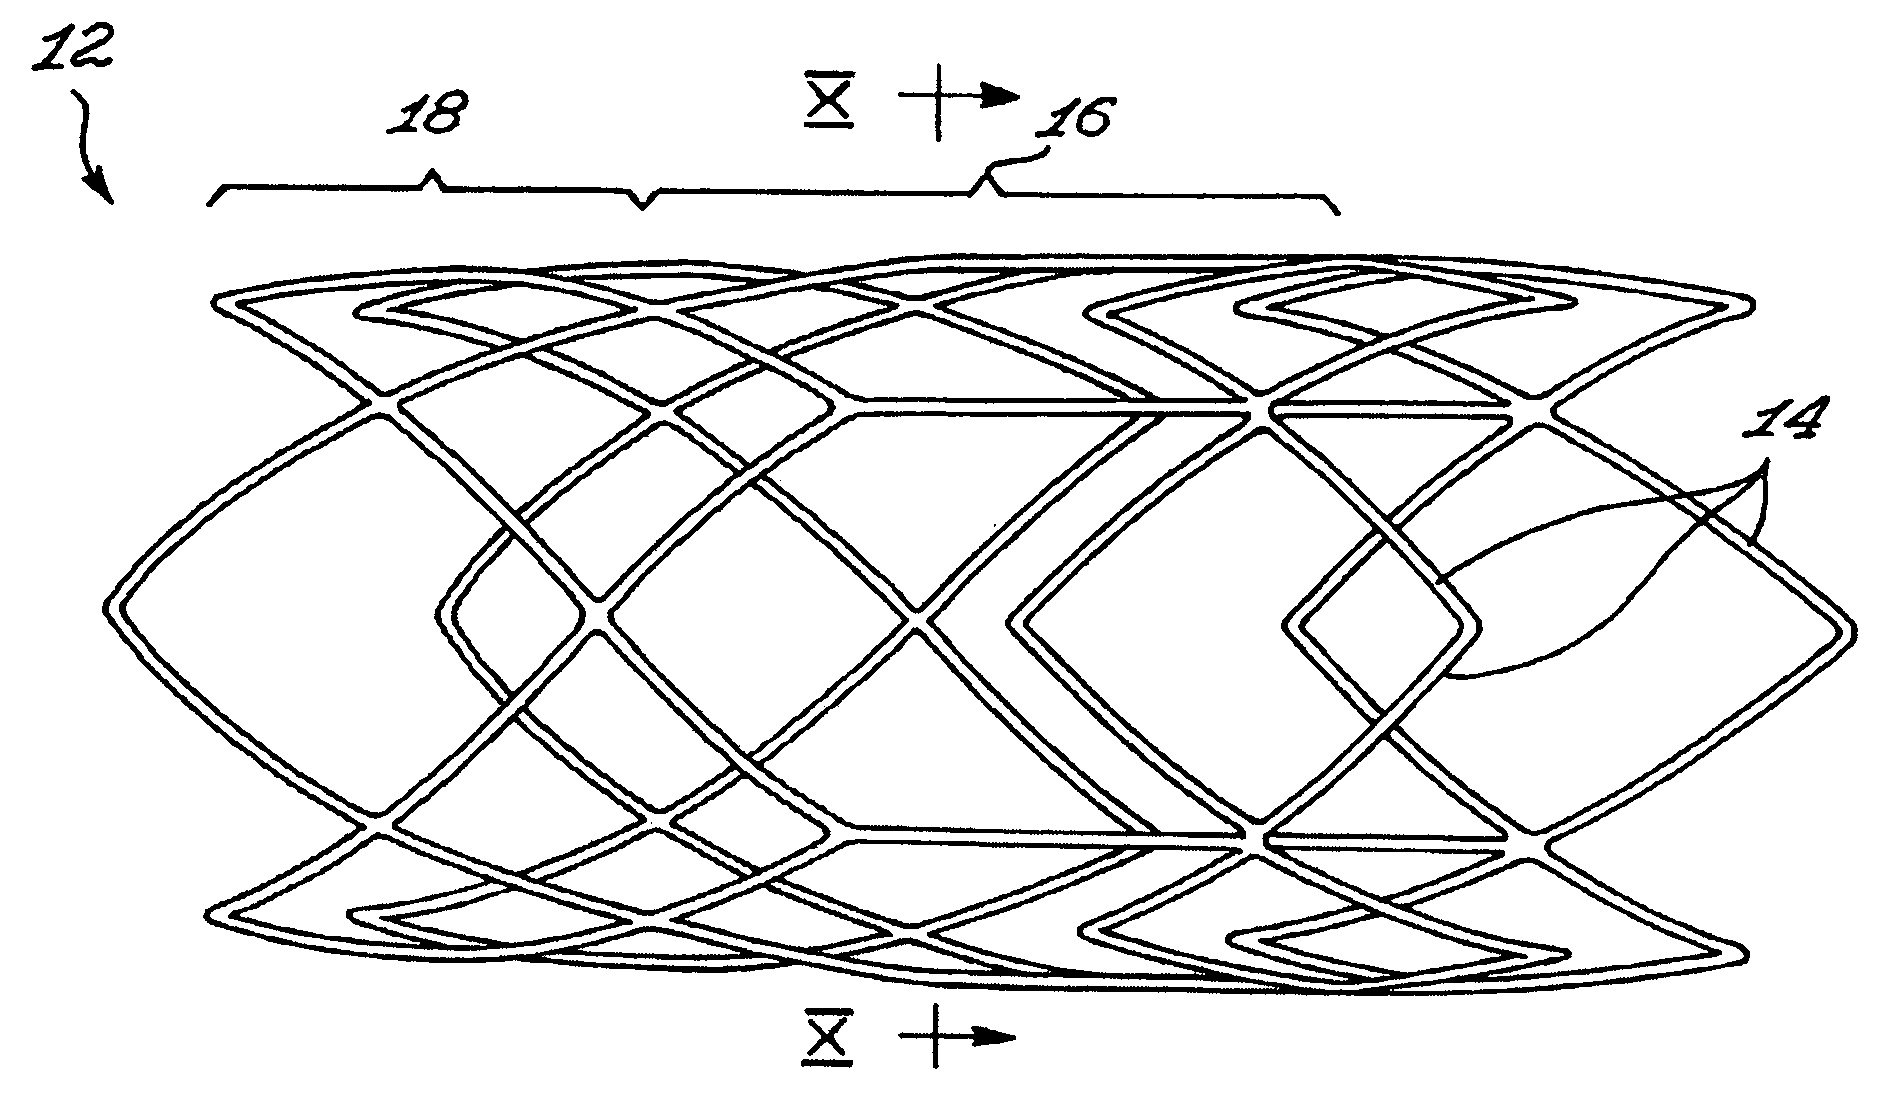 Stent and method of manufacturing same